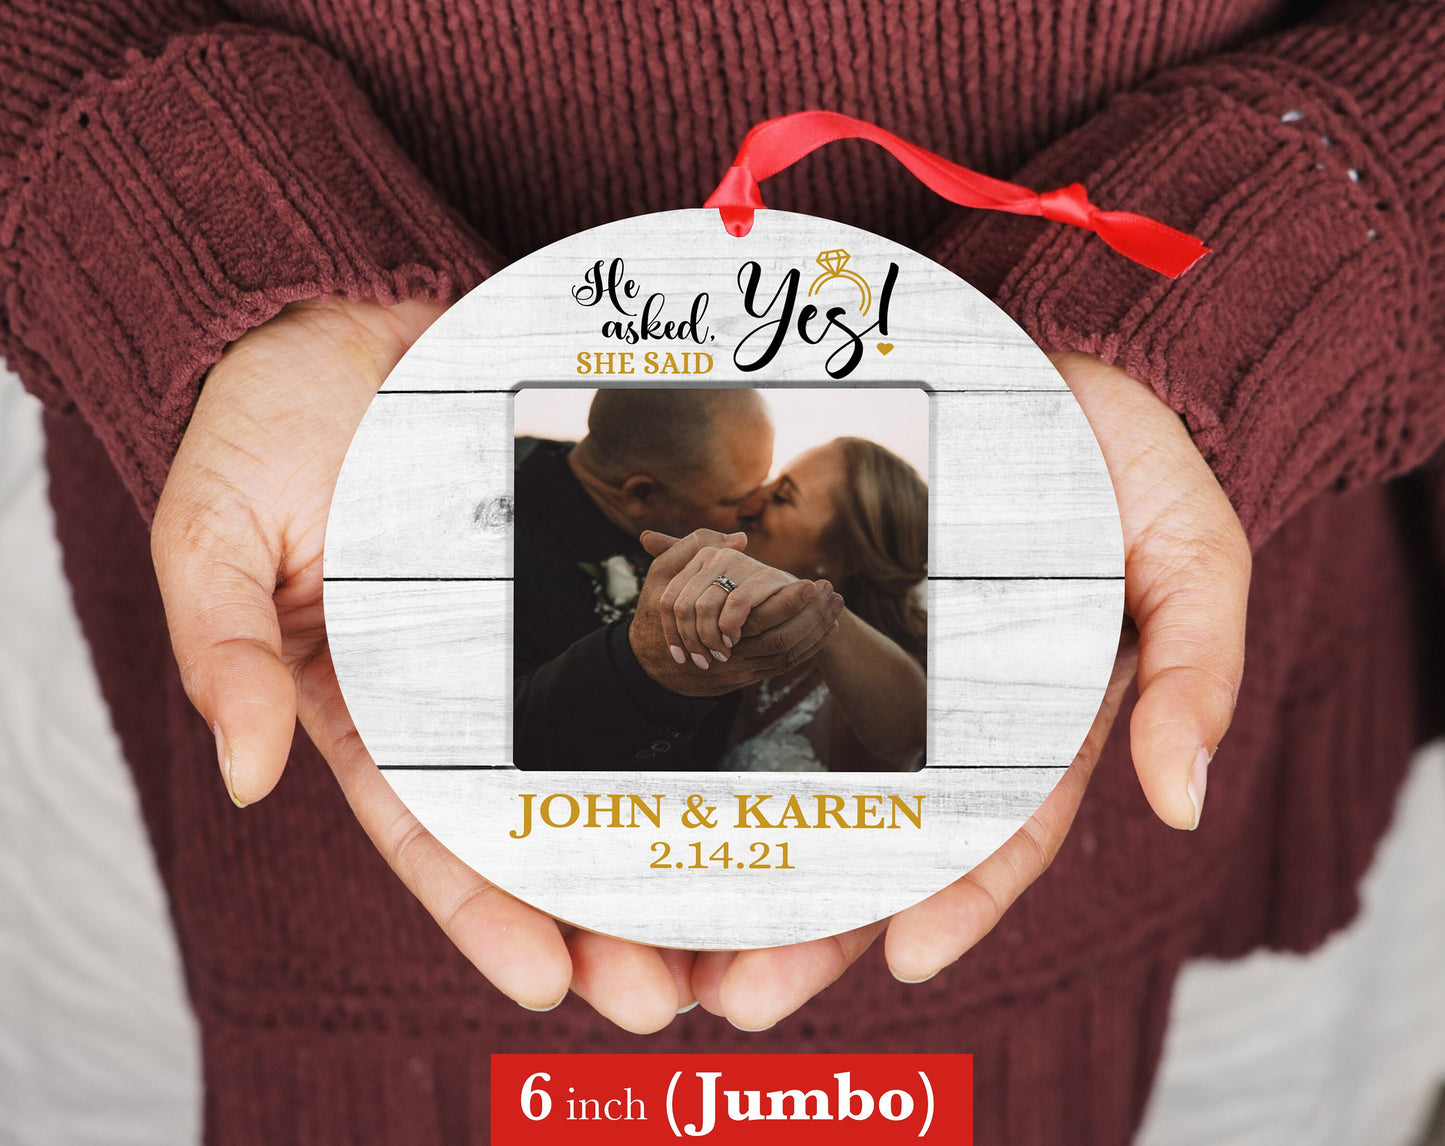 Personalized Engaged Ornament - Custom Photo Ornament - 4" or 6" - Christmas Ornament - Couple Wedding Gift - He Asked, He Said Yes!